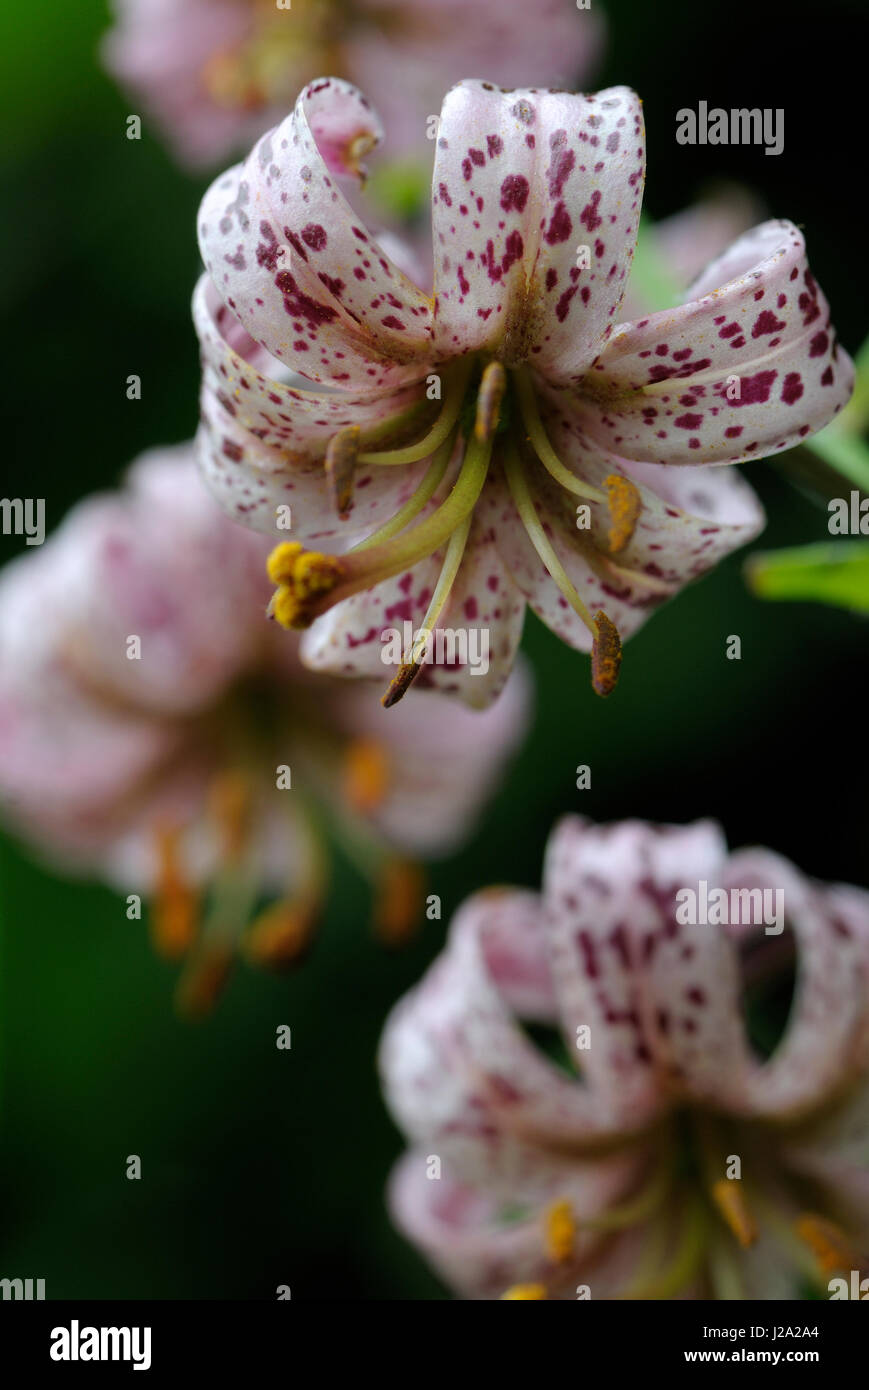 Martagon flower in close-up Stock Photo